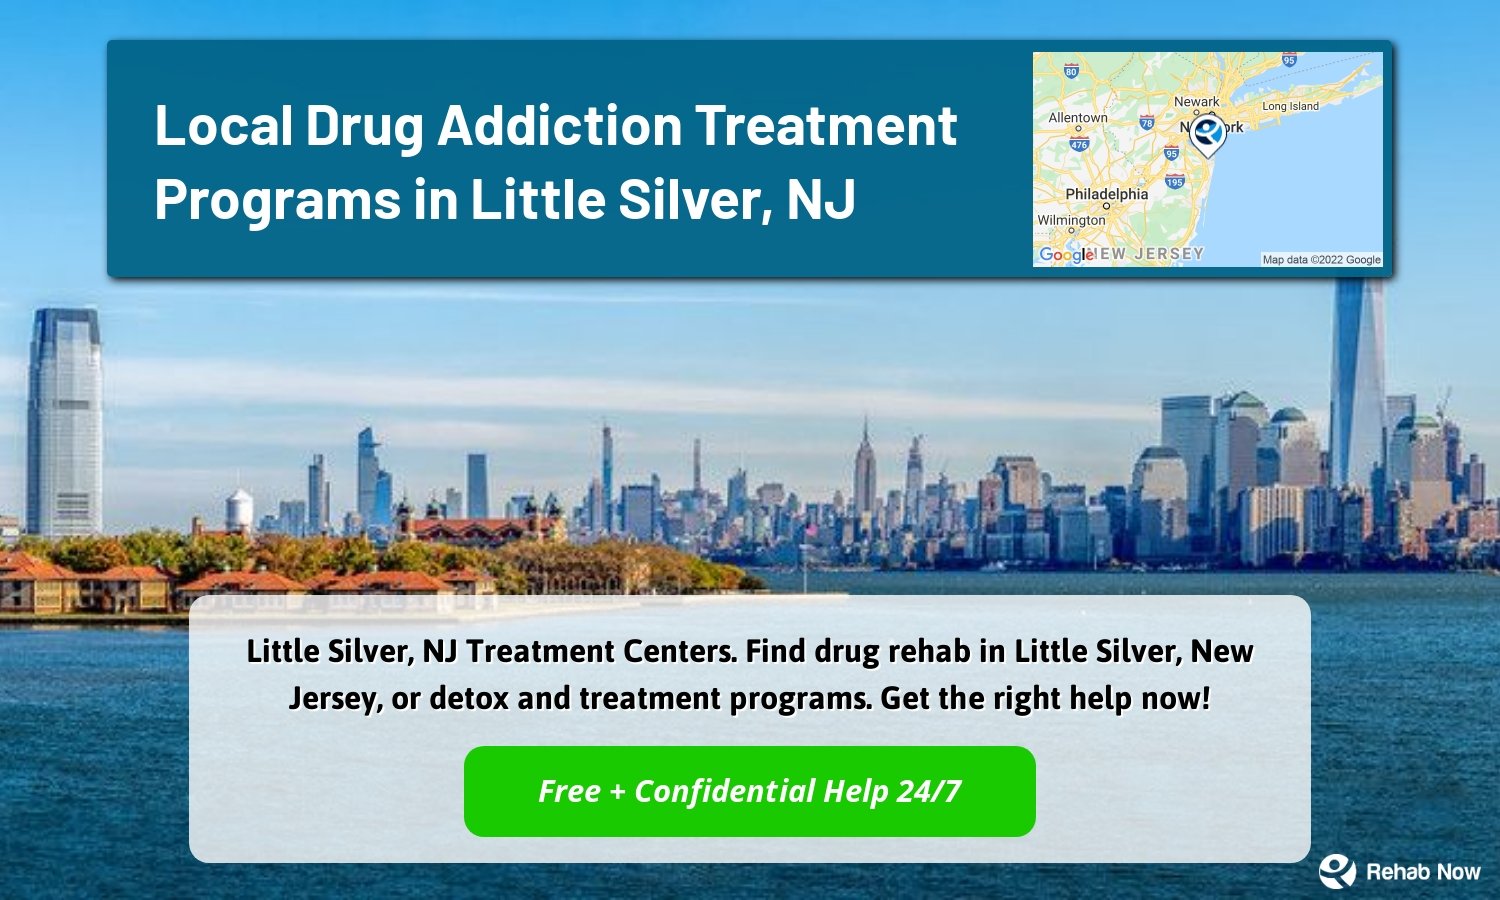 Little Silver, NJ Treatment Centers. Find drug rehab in Little Silver, New Jersey, or detox and treatment programs. Get the right help now!